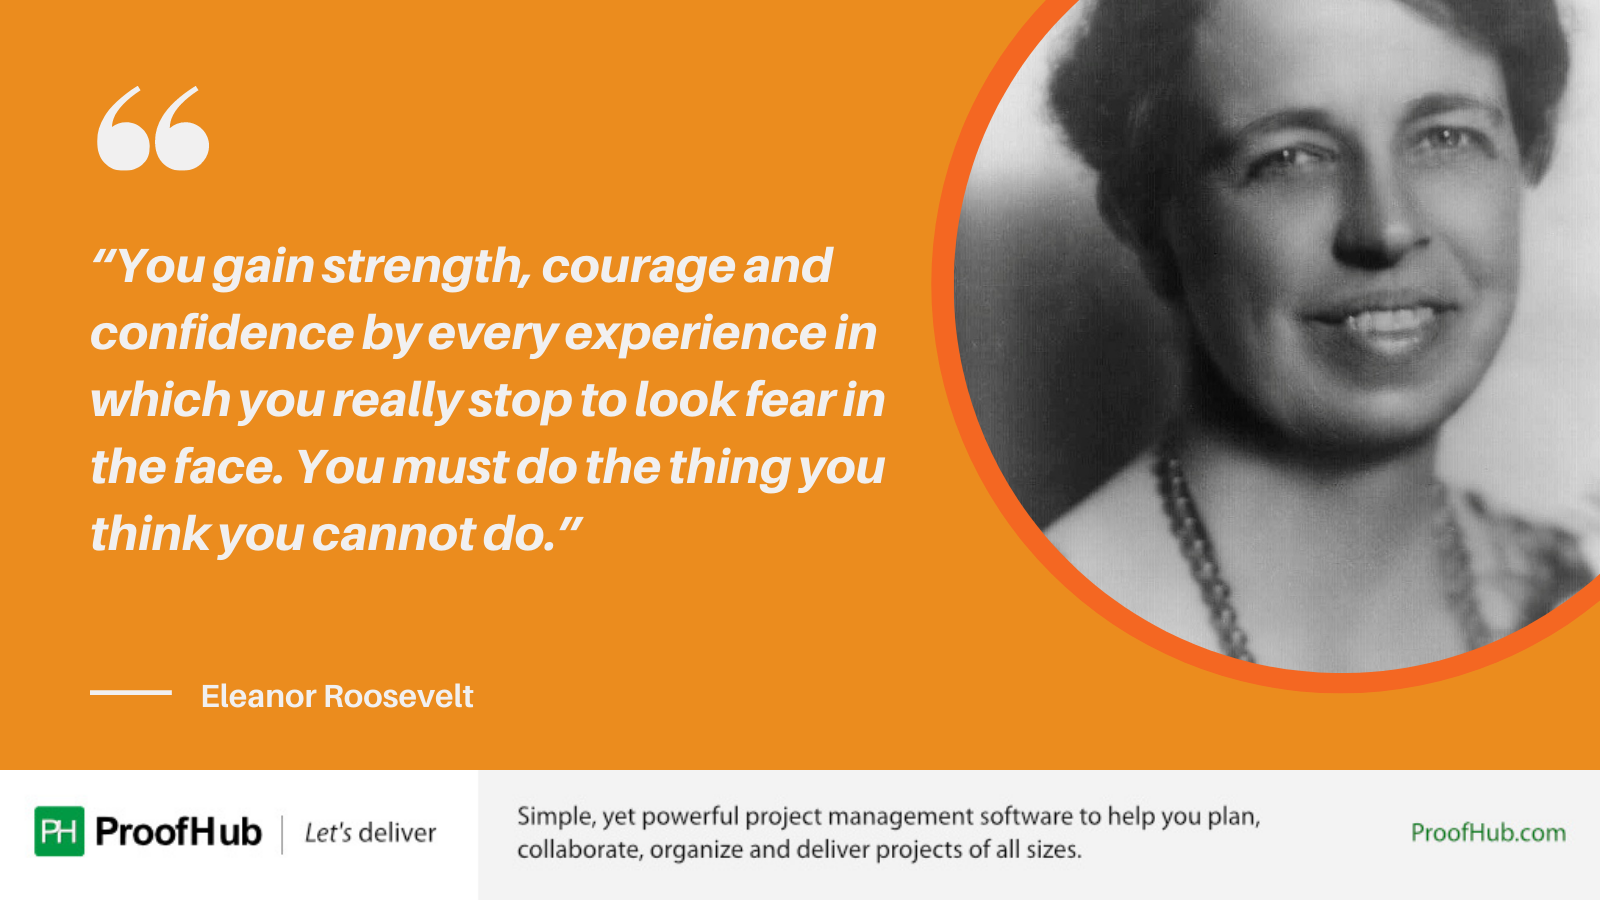 You gain strength, courage and confidence by every experience in which you really stop to look fear in the face. You must do the thing you think you cannot do. quote by Eleanor Roosevelt